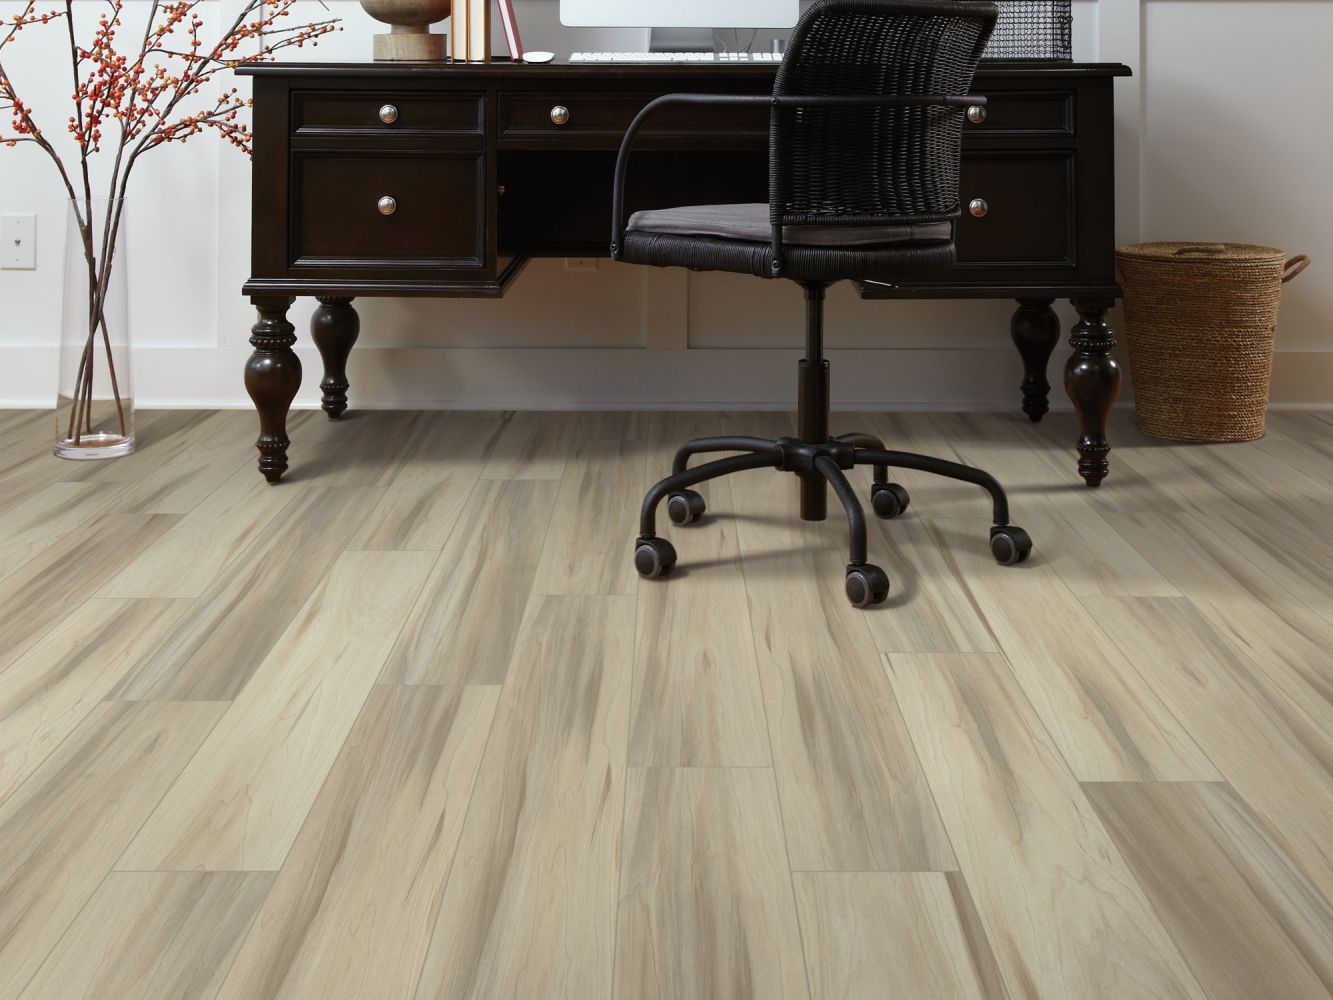 Shaw Floors Resilient Property Solutions Prominence Plus Natural Maple 00258_VE381